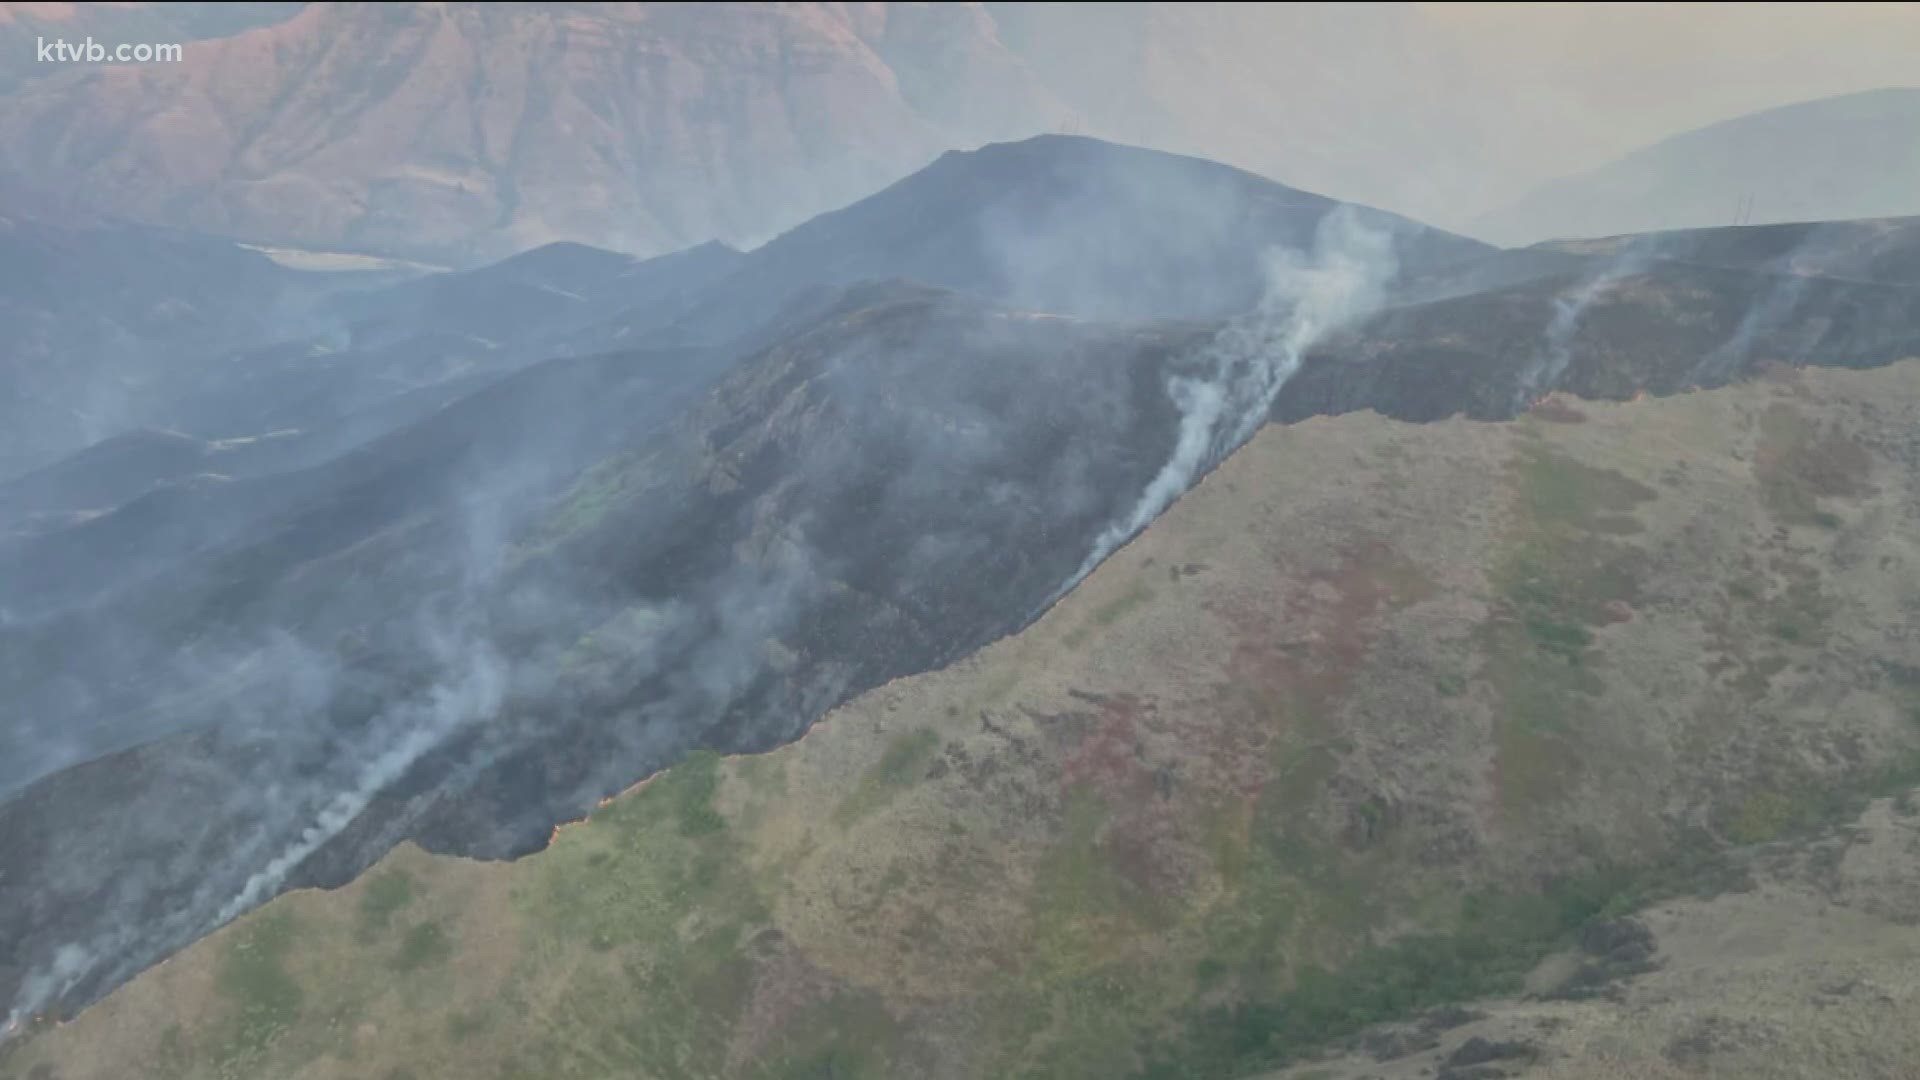 The Snake River Complex, Dixie-Jumbo Fires and the Mud Lick Fire continue to burn